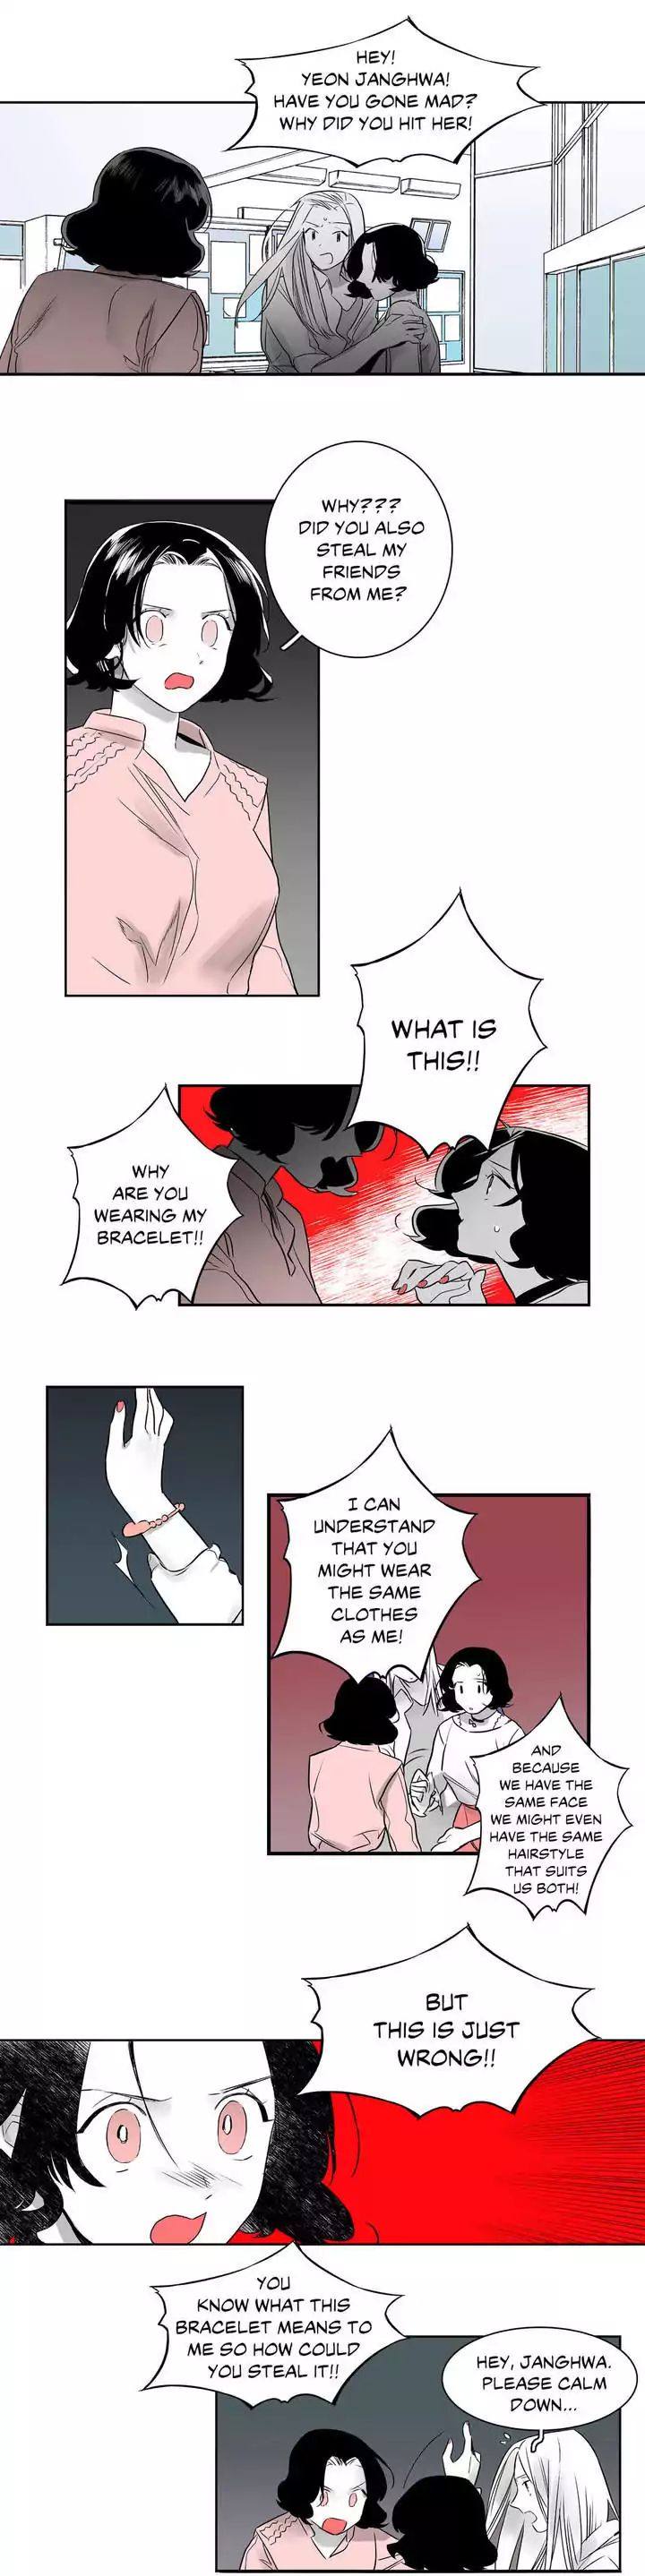 Vanishing Twin - Chapter 5 Page 8